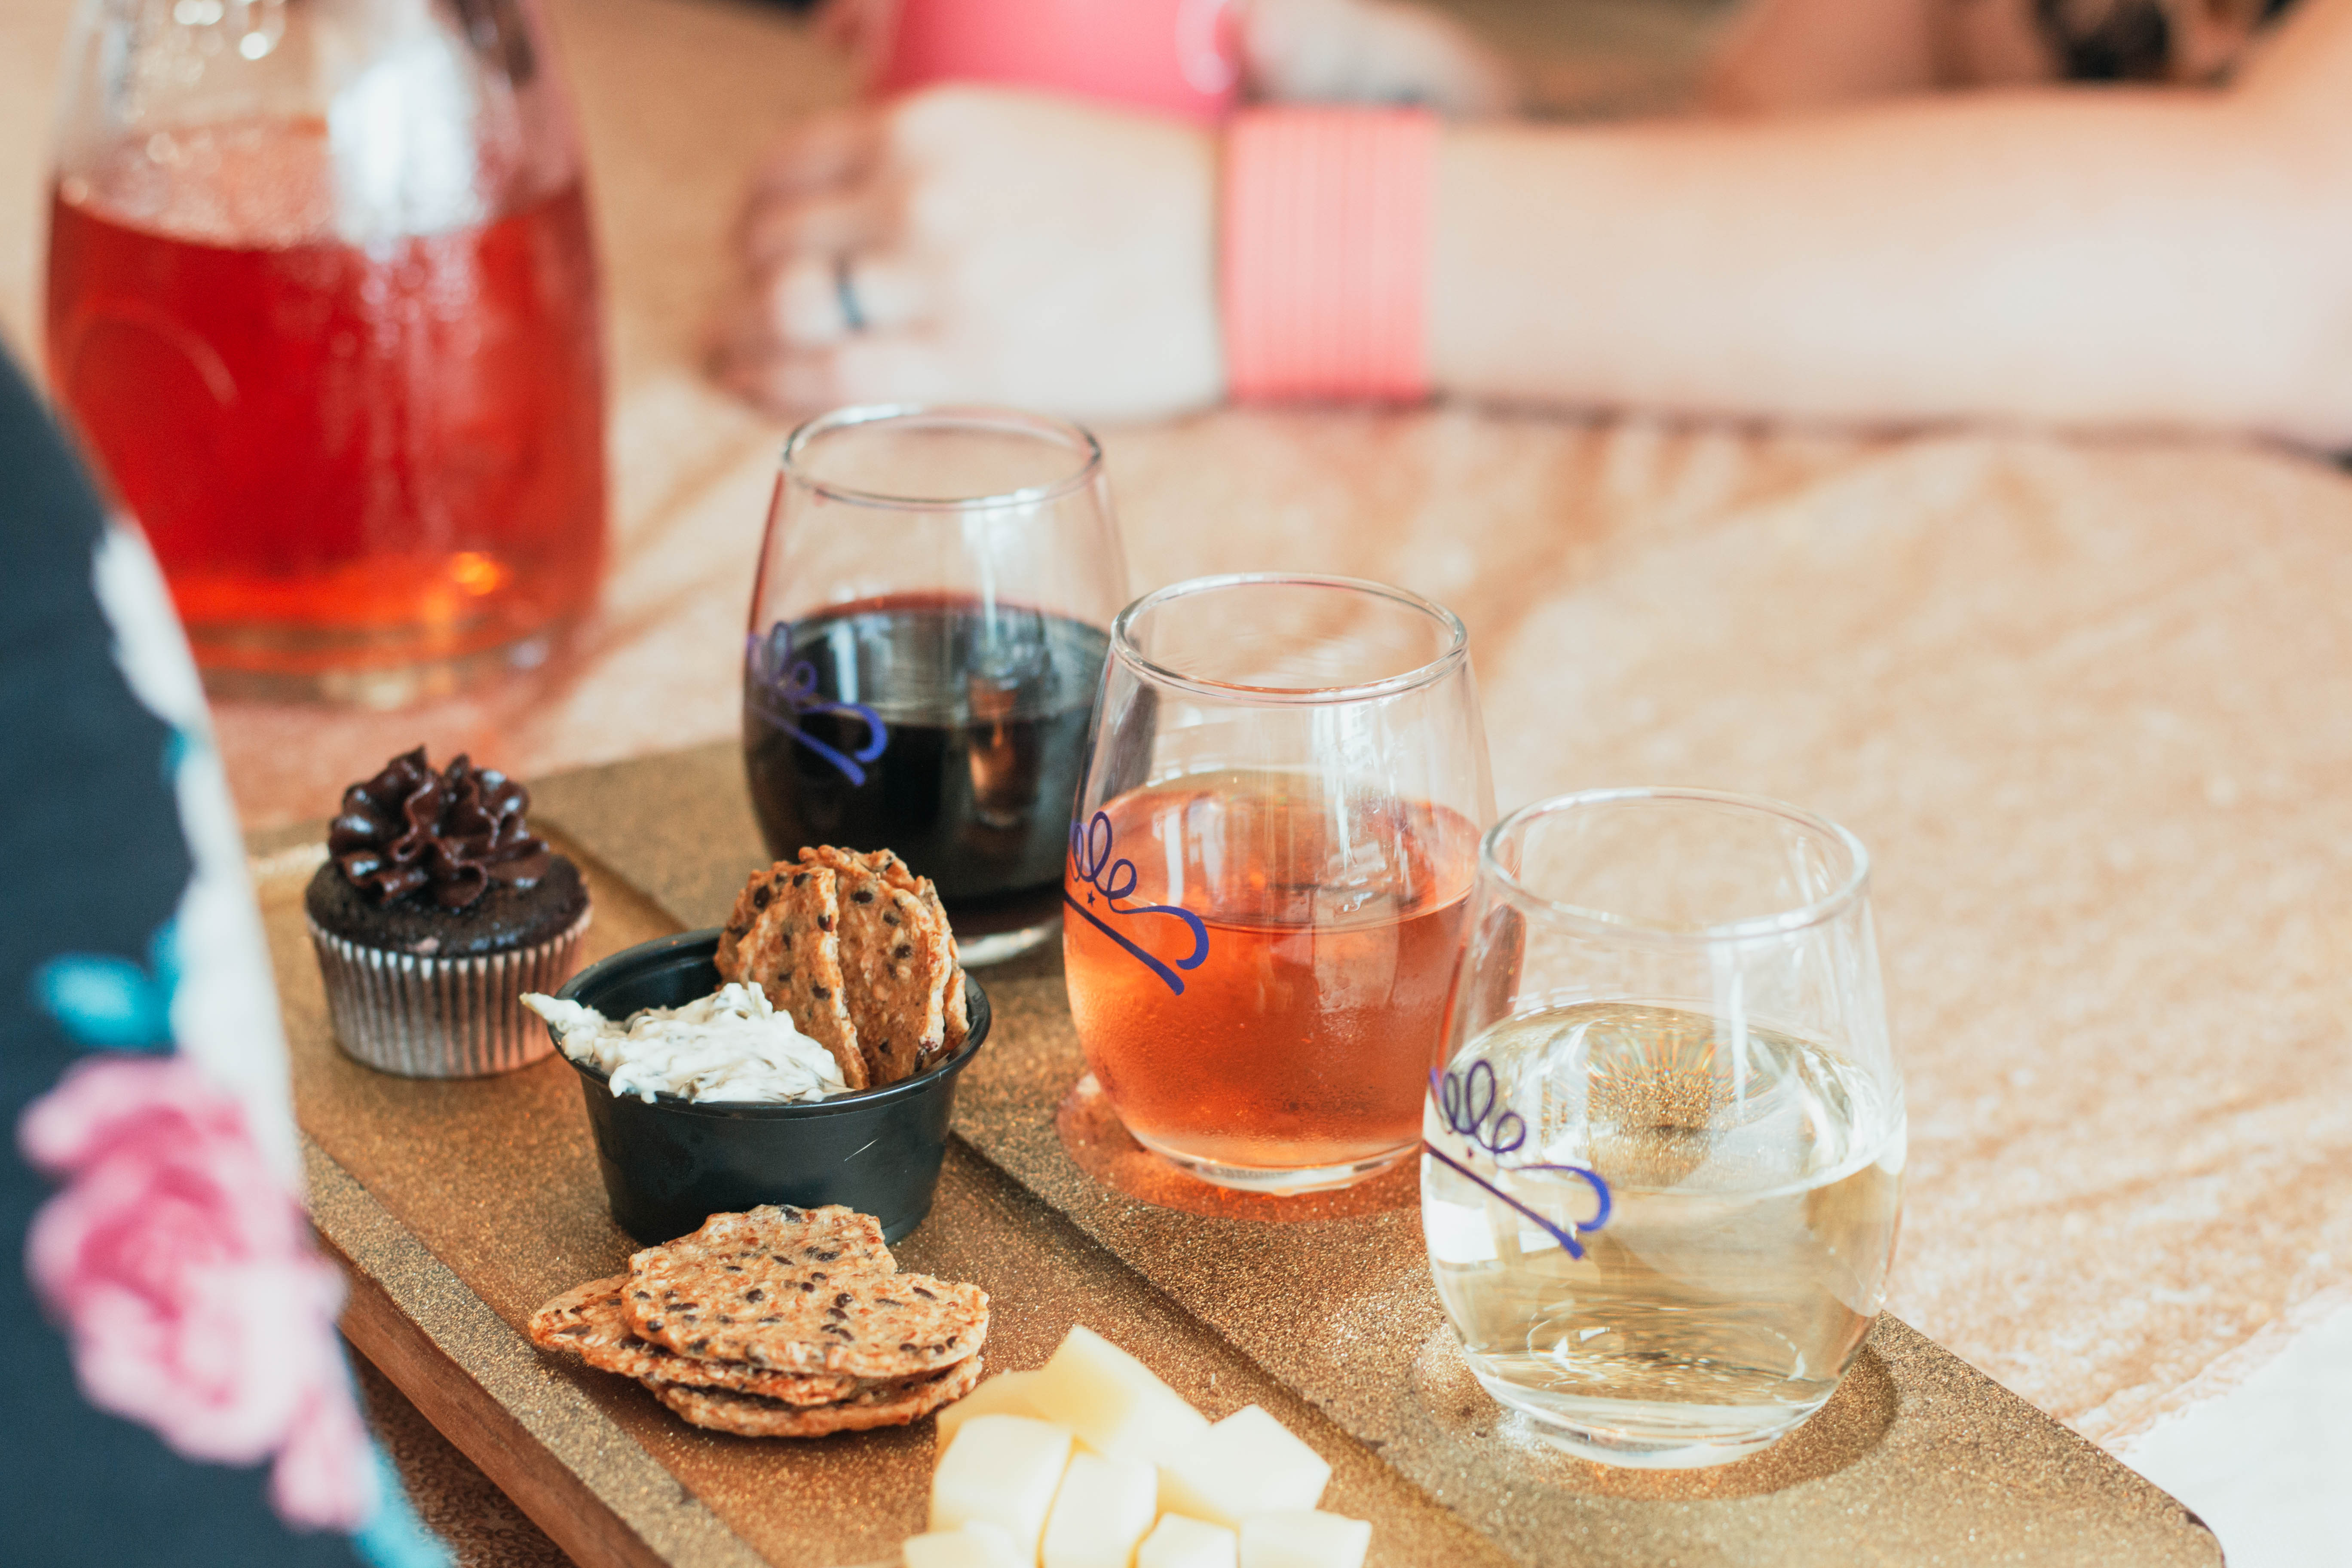 Weston Wine Company- Tray of snacks and three glasses of wine. Including a chocolate cup cake, crackers, cheese, red, white, and pink wine.